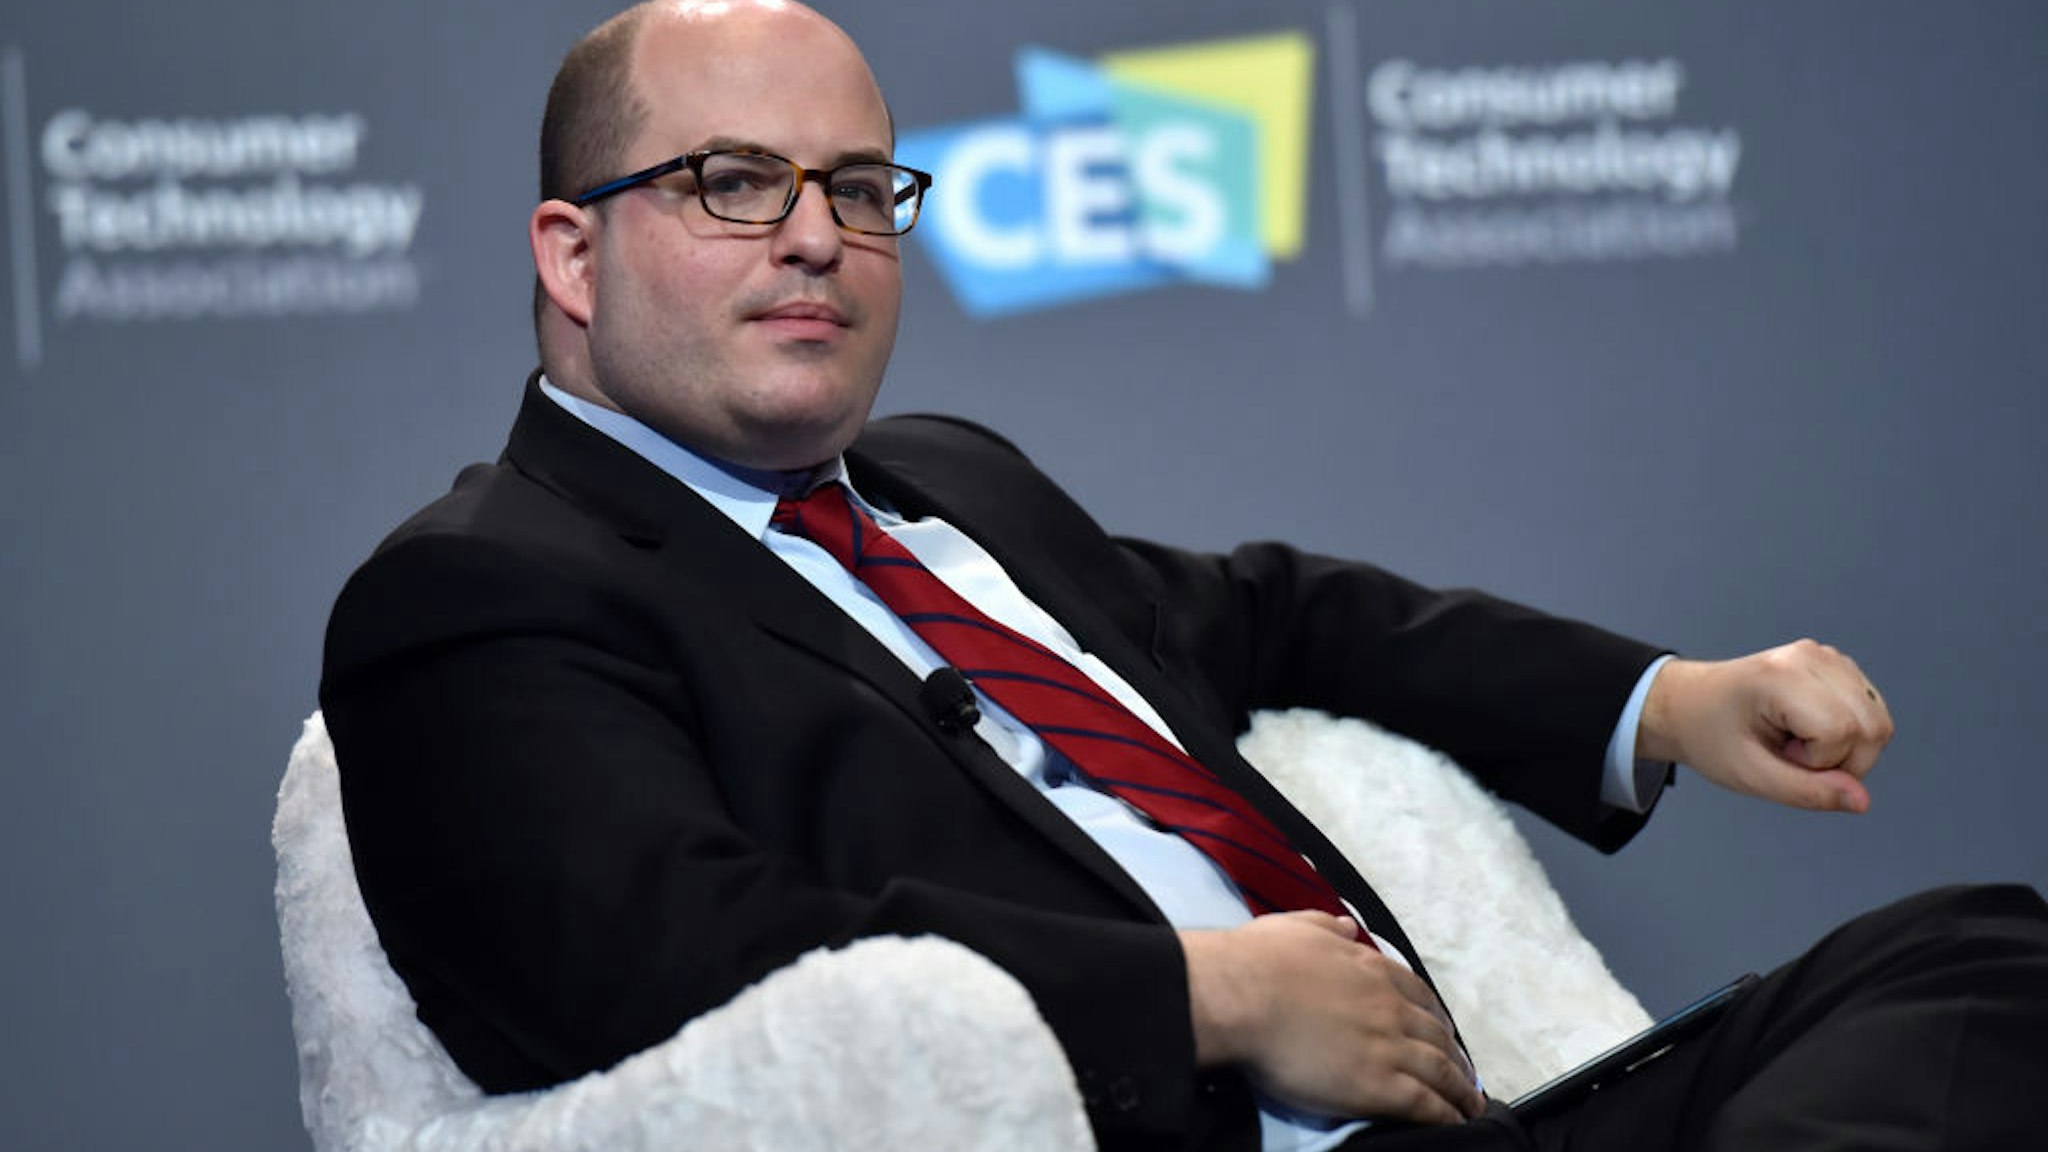 LAS VEGAS, NEVADA - JANUARY 09: CNN anchor and correspondent Brian Stelter speaks during a press event at CES 2019 at the Aria Resort &amp; Casino on January 9, 2019 in Las Vegas, Nevada. CES, the world's largest annual consumer technology trade show, runs through January 11 and features about 4,500 exhibitors showing off their latest products and services to more than 180,000 attendees. (Photo by David Becker/Getty Images)